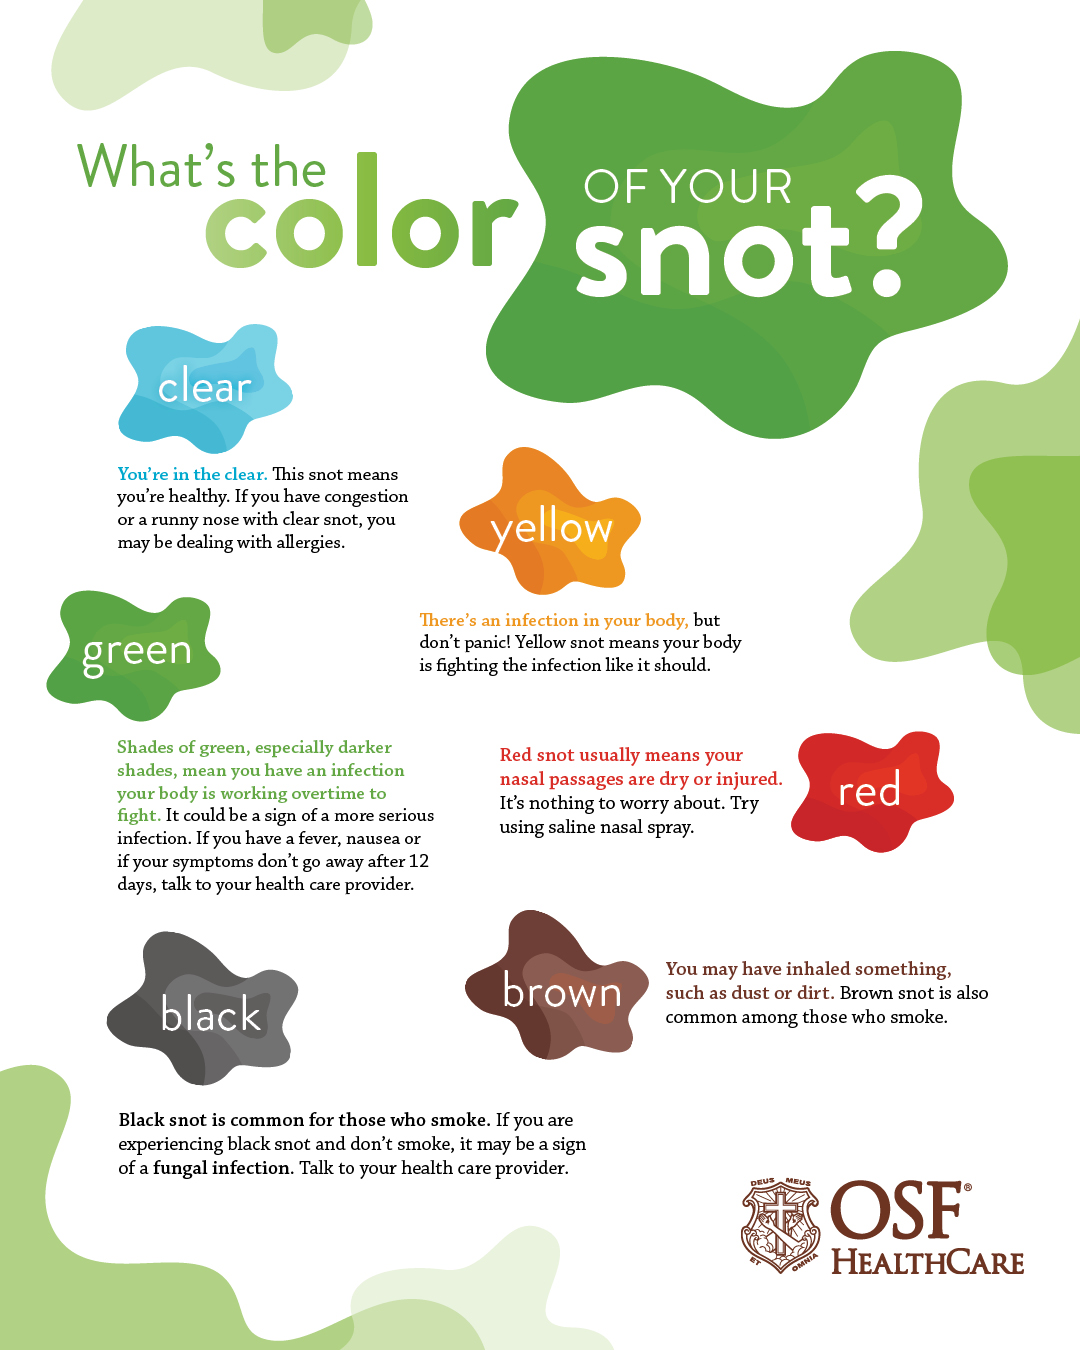 What Does the Color of Your Food Mean? - Color Meanings